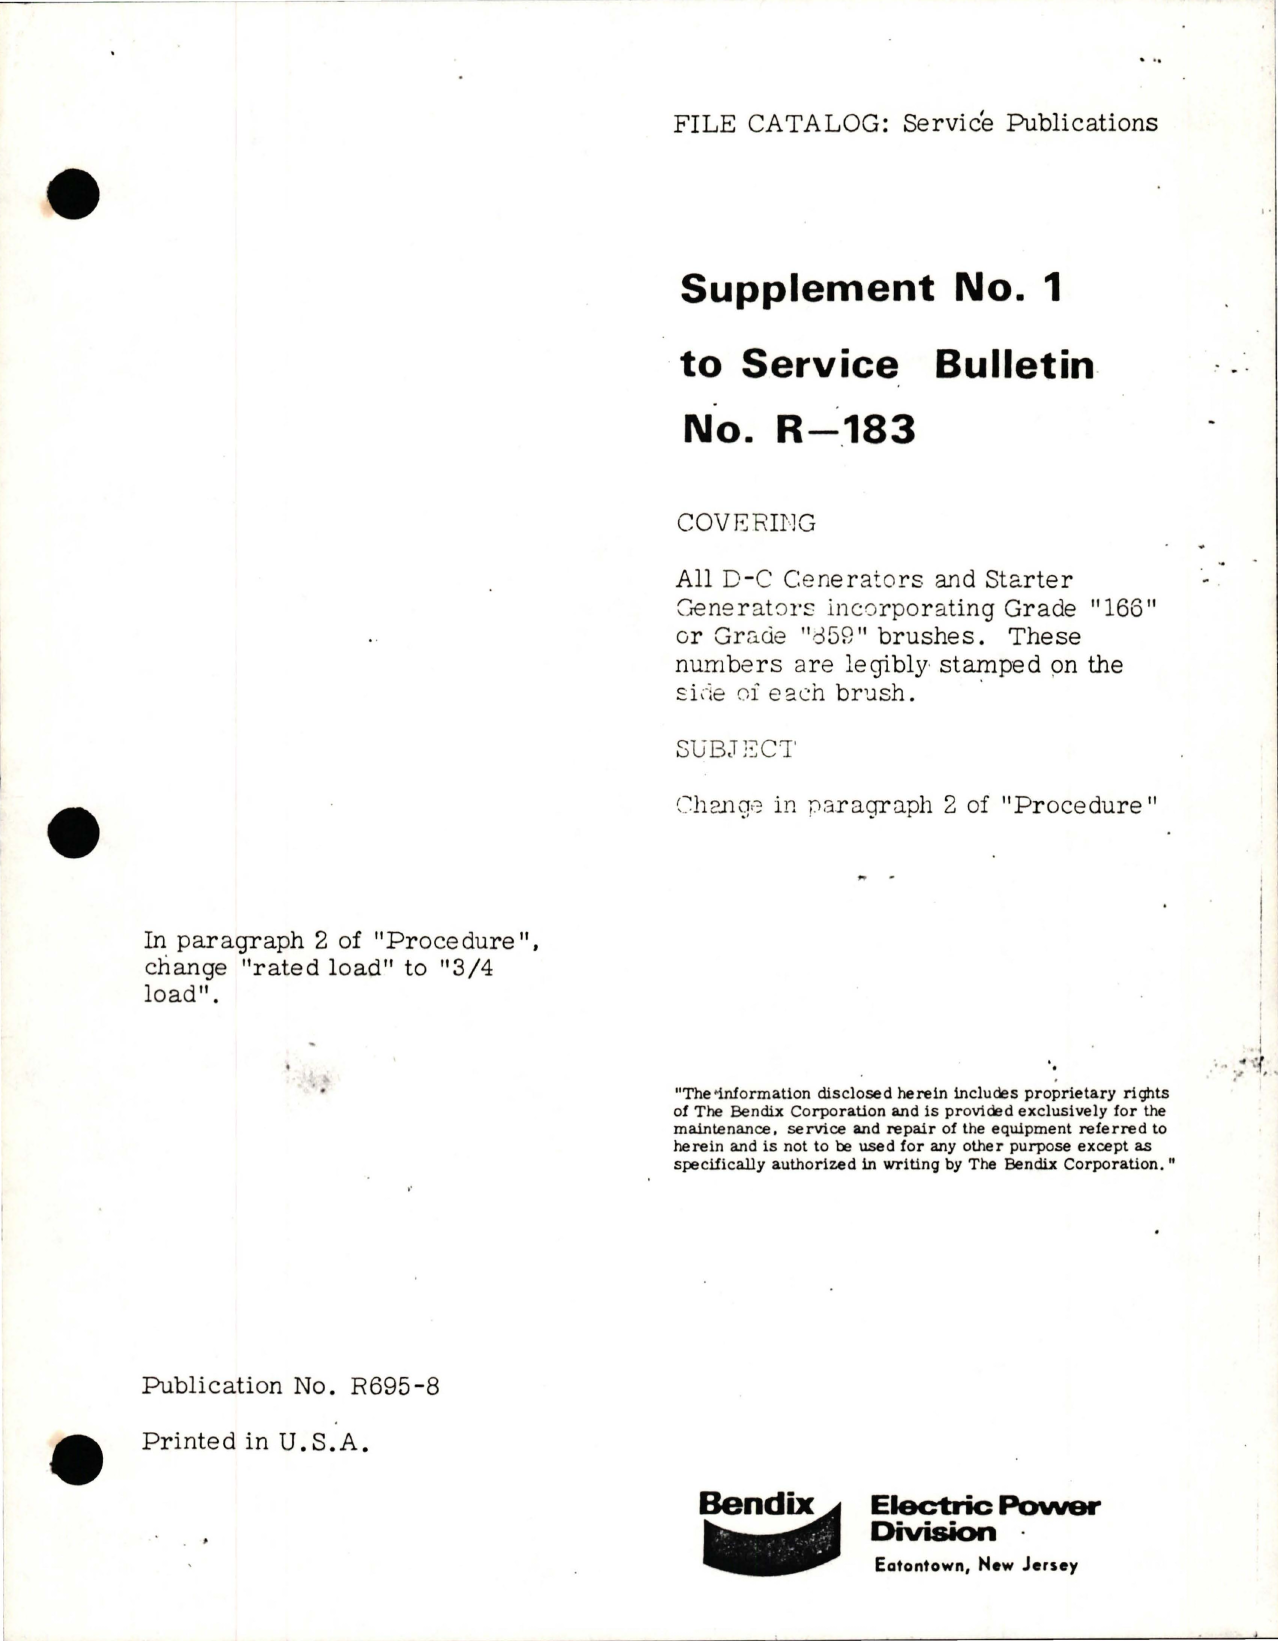 Sample page 1 from AirCorps Library document: Supplement No. 1 for D-C Generators & Starter Generators Change in Procedure - Grade 166 and 859 Brushes